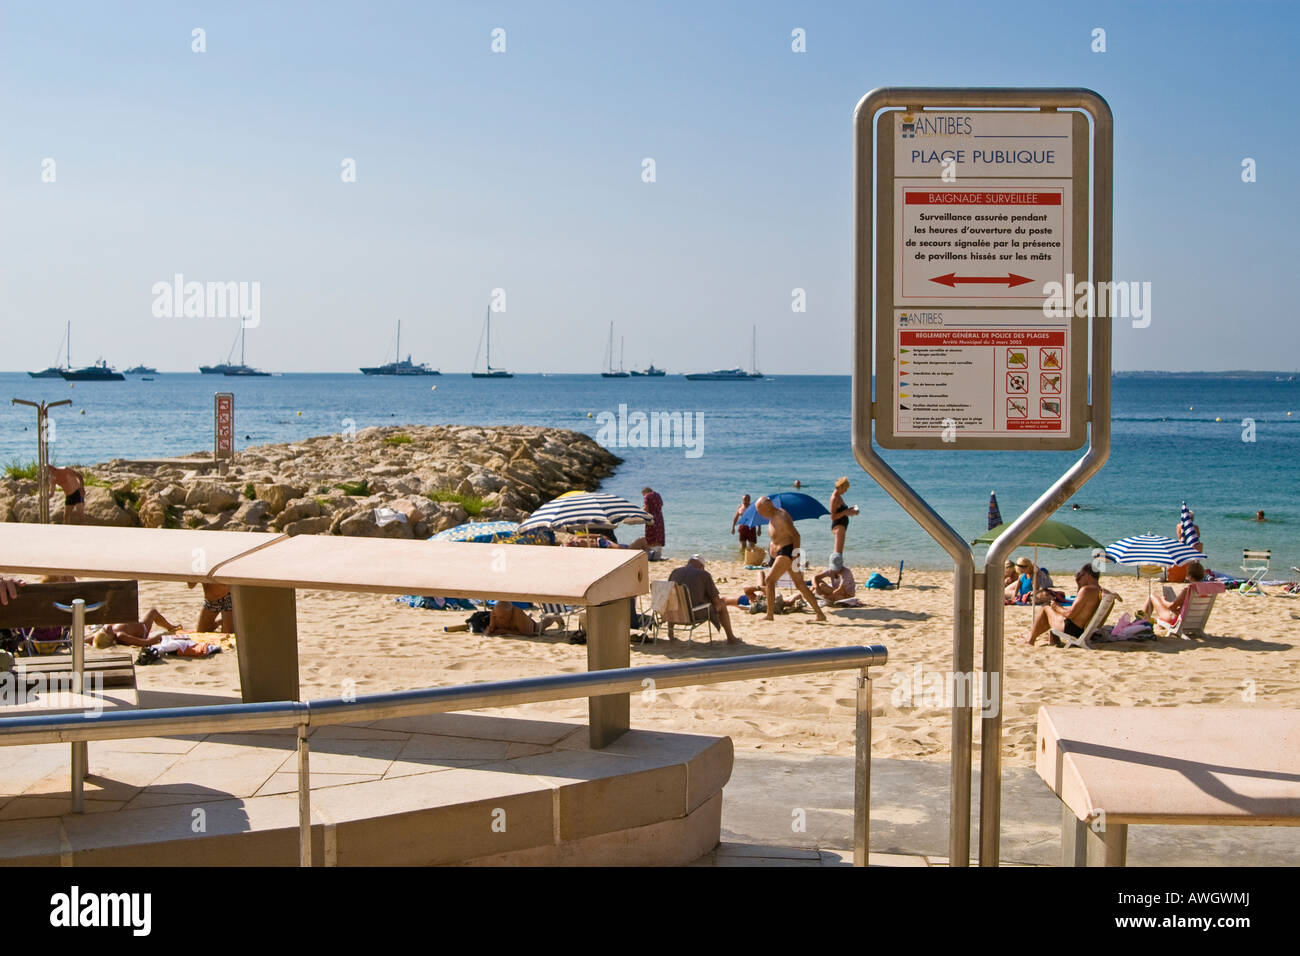 Antibes Juan les Pins public beach people and beach rules sign Stock Photo